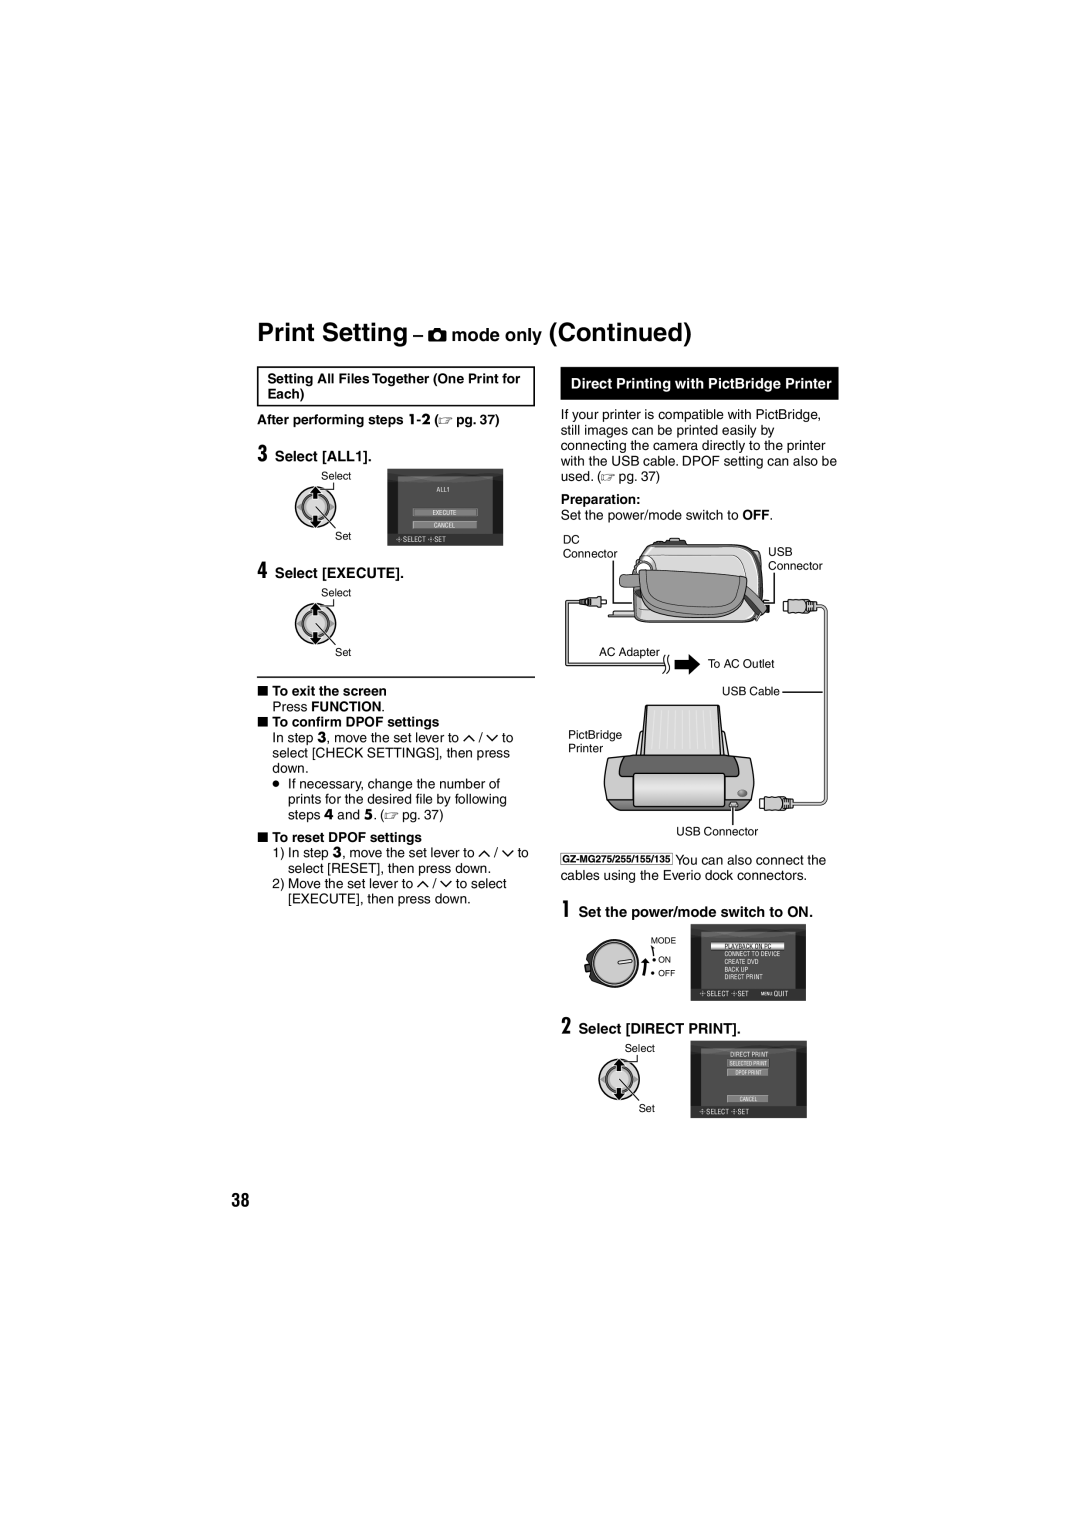 JVC GZ-MG255E/EK Print Setting - # mode only Continued, Select EXECUTE, Direct Printing with PictBridge Printer 